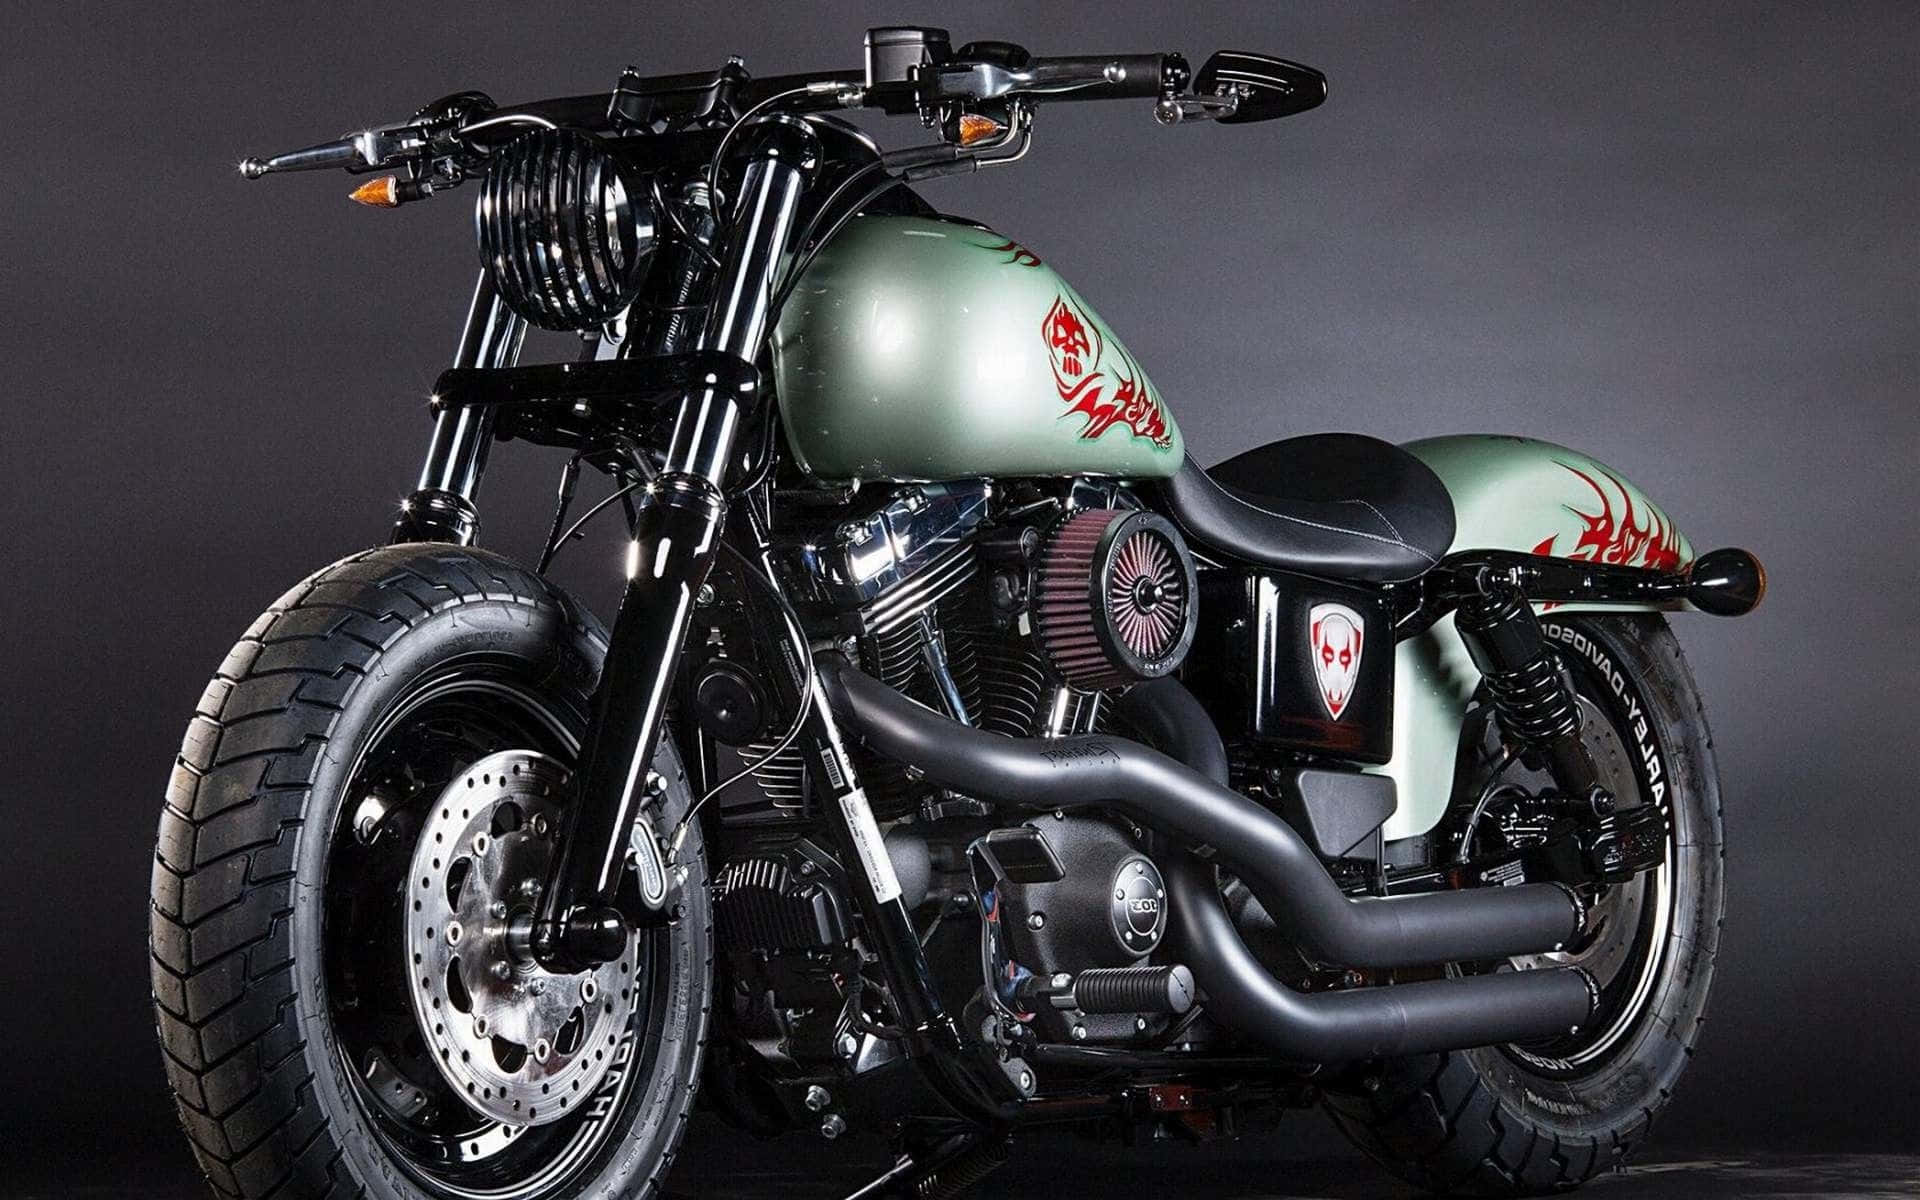 Custom Green Motorcyclewith Flame Decals Background